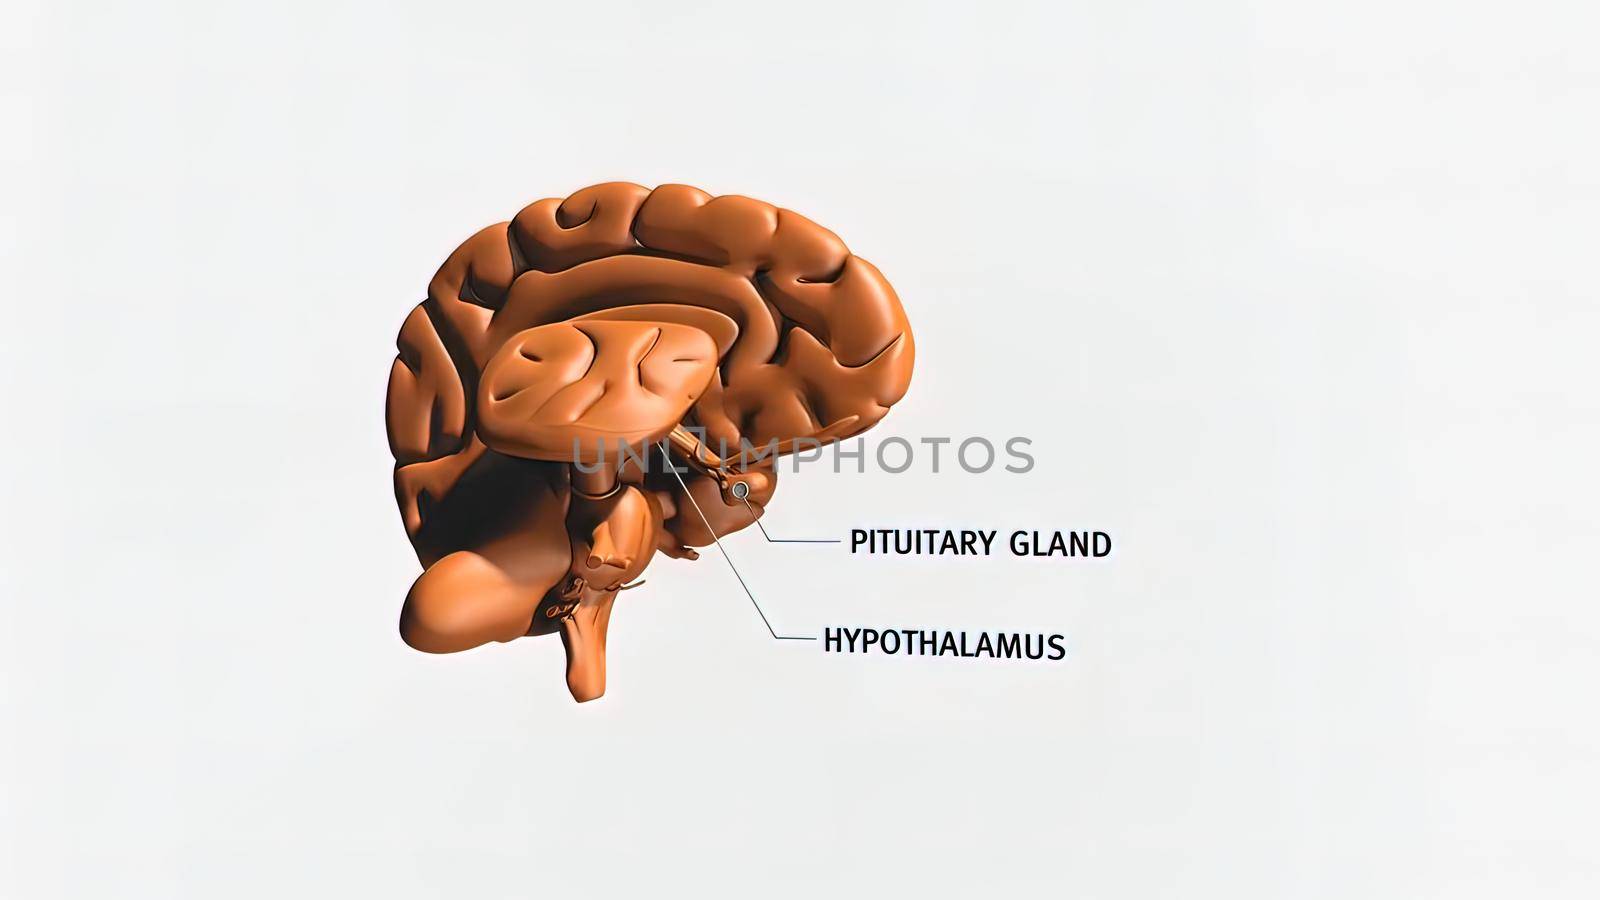 The hypothalamus is a region of the brain. It contains several types of neurons responsible for secreting different hormone 3D illustration